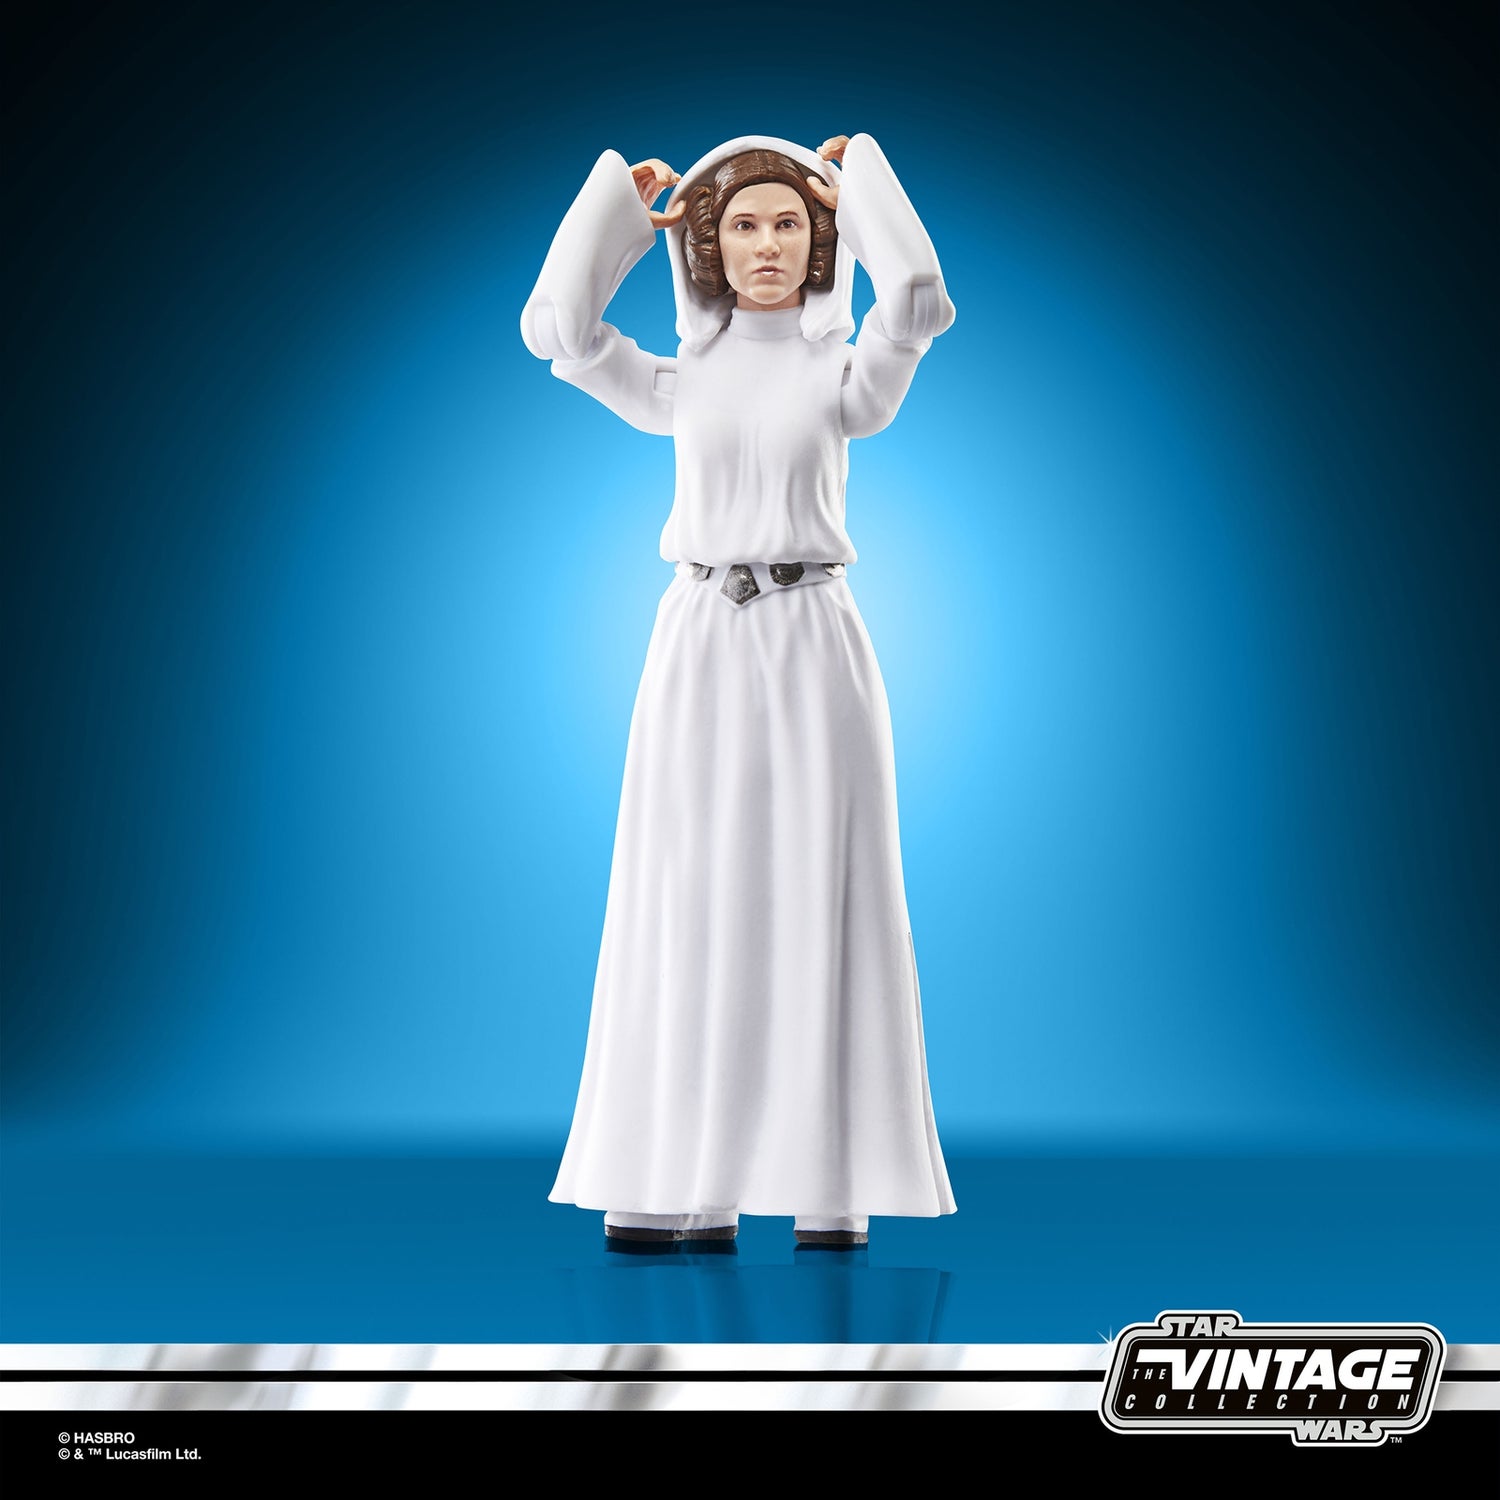 Hasbro Star Wars The Vintage Collection Leia Organa, Star Wars: A New Hope Action Figure (3.75”)